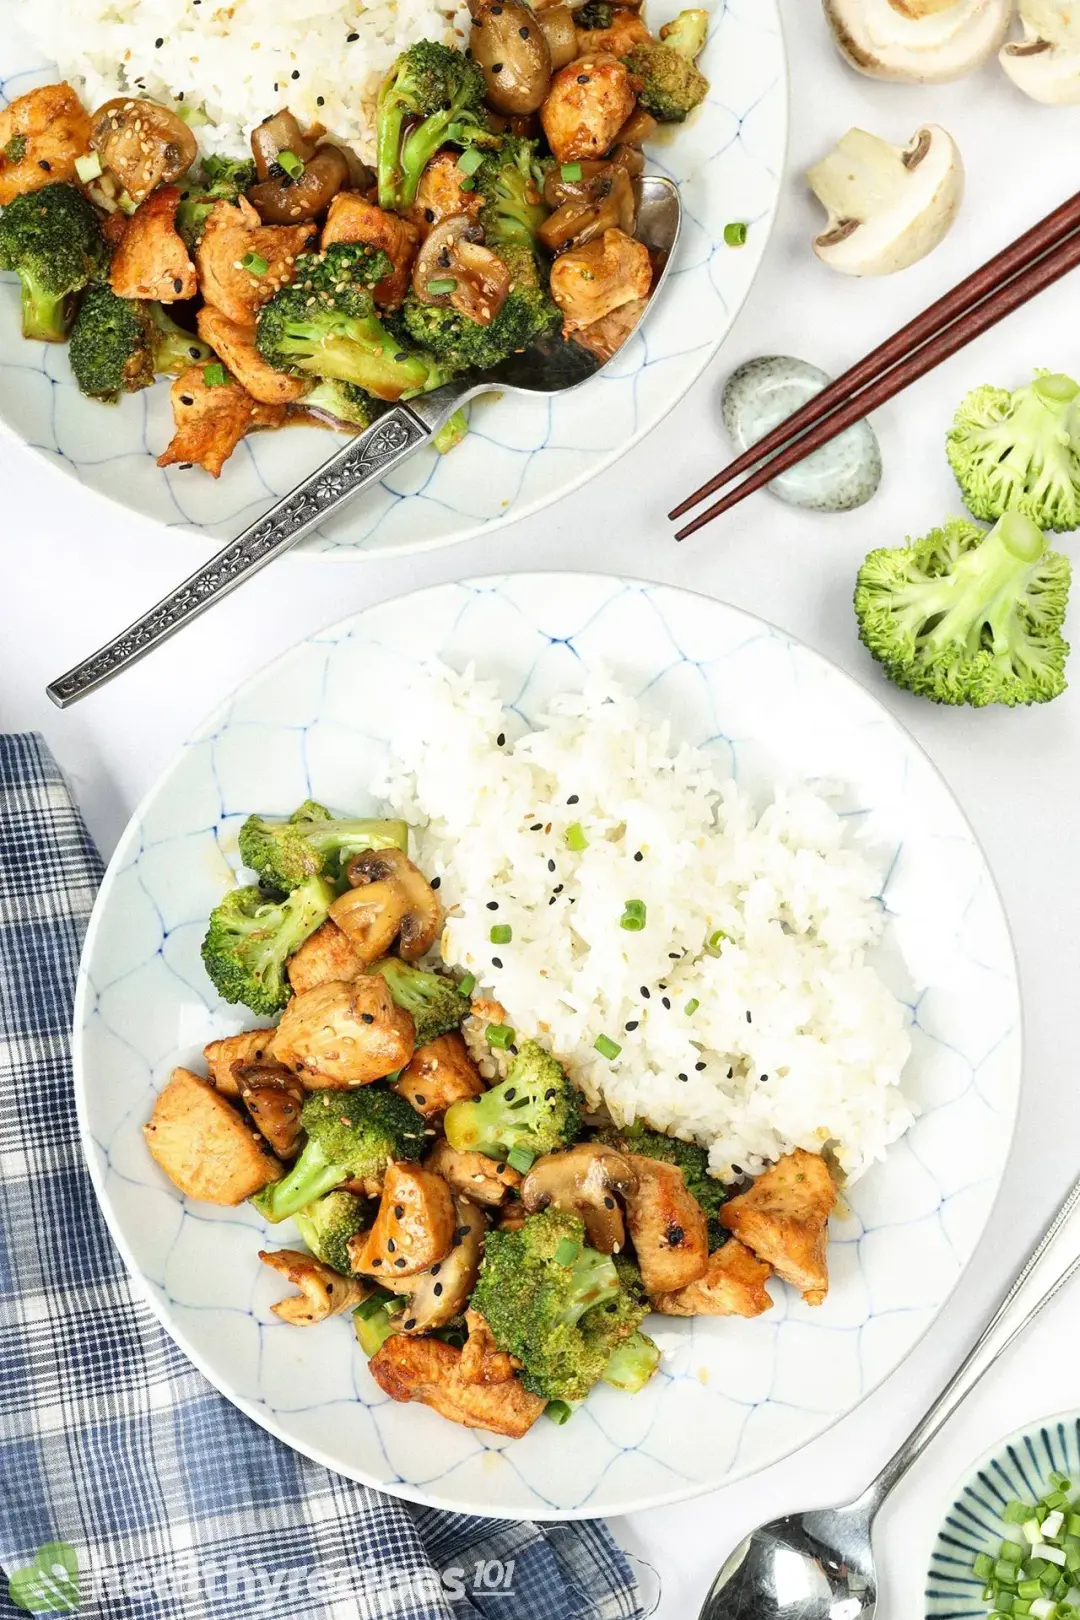 What to Serve With Stir fried Chicken and Broccoli